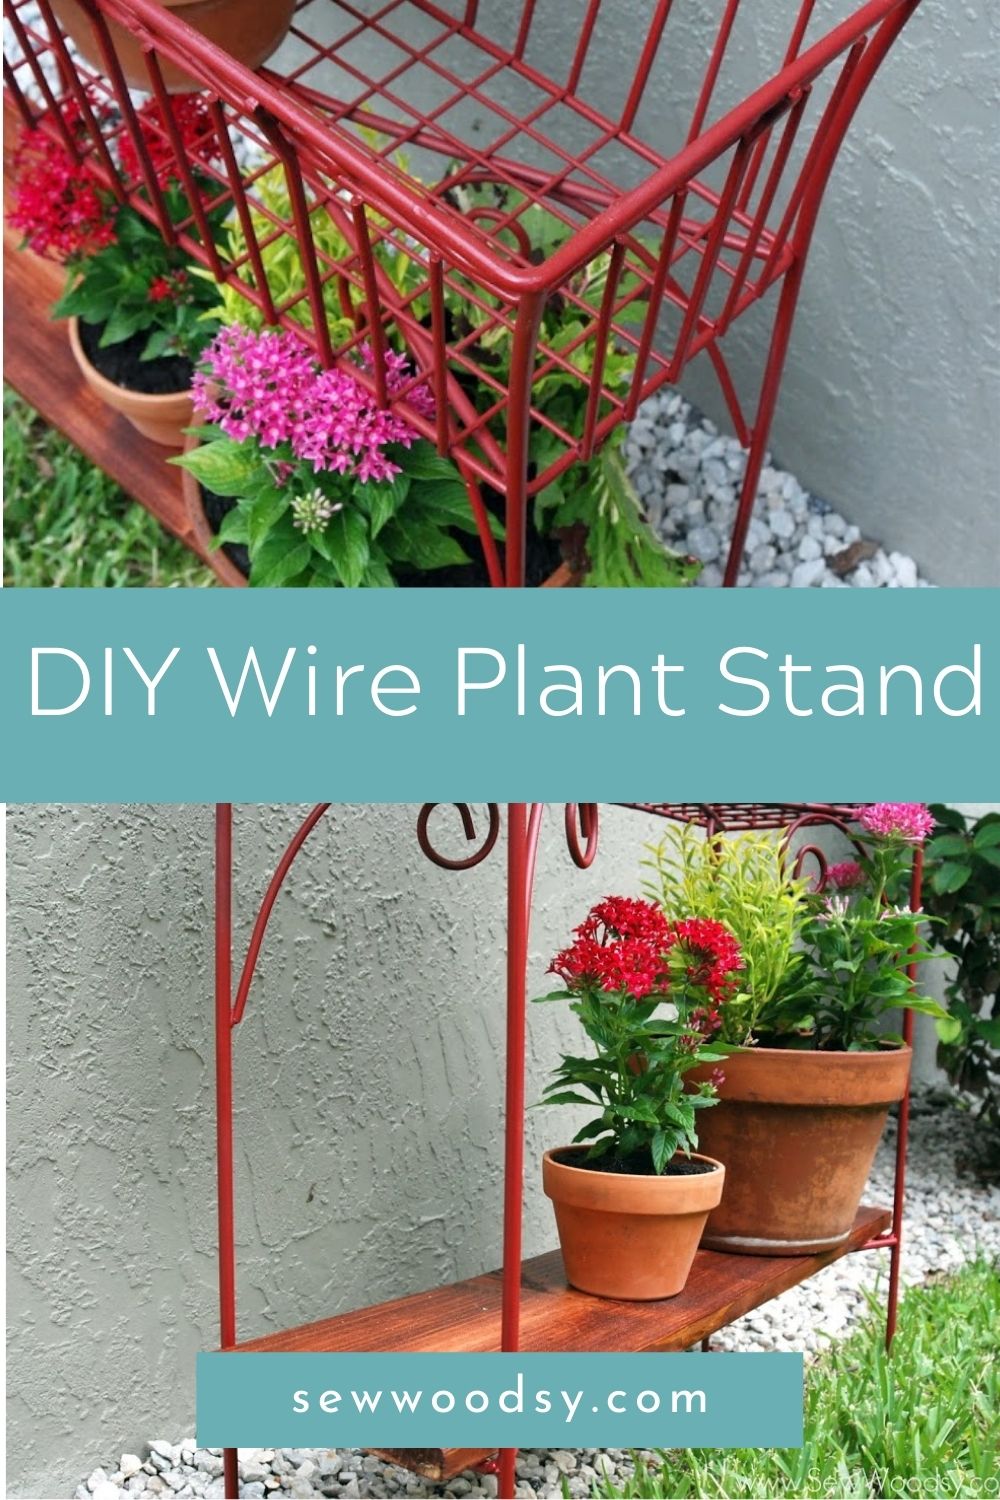 Two photos of a red wire plant stand split by text on image for Pinterest.